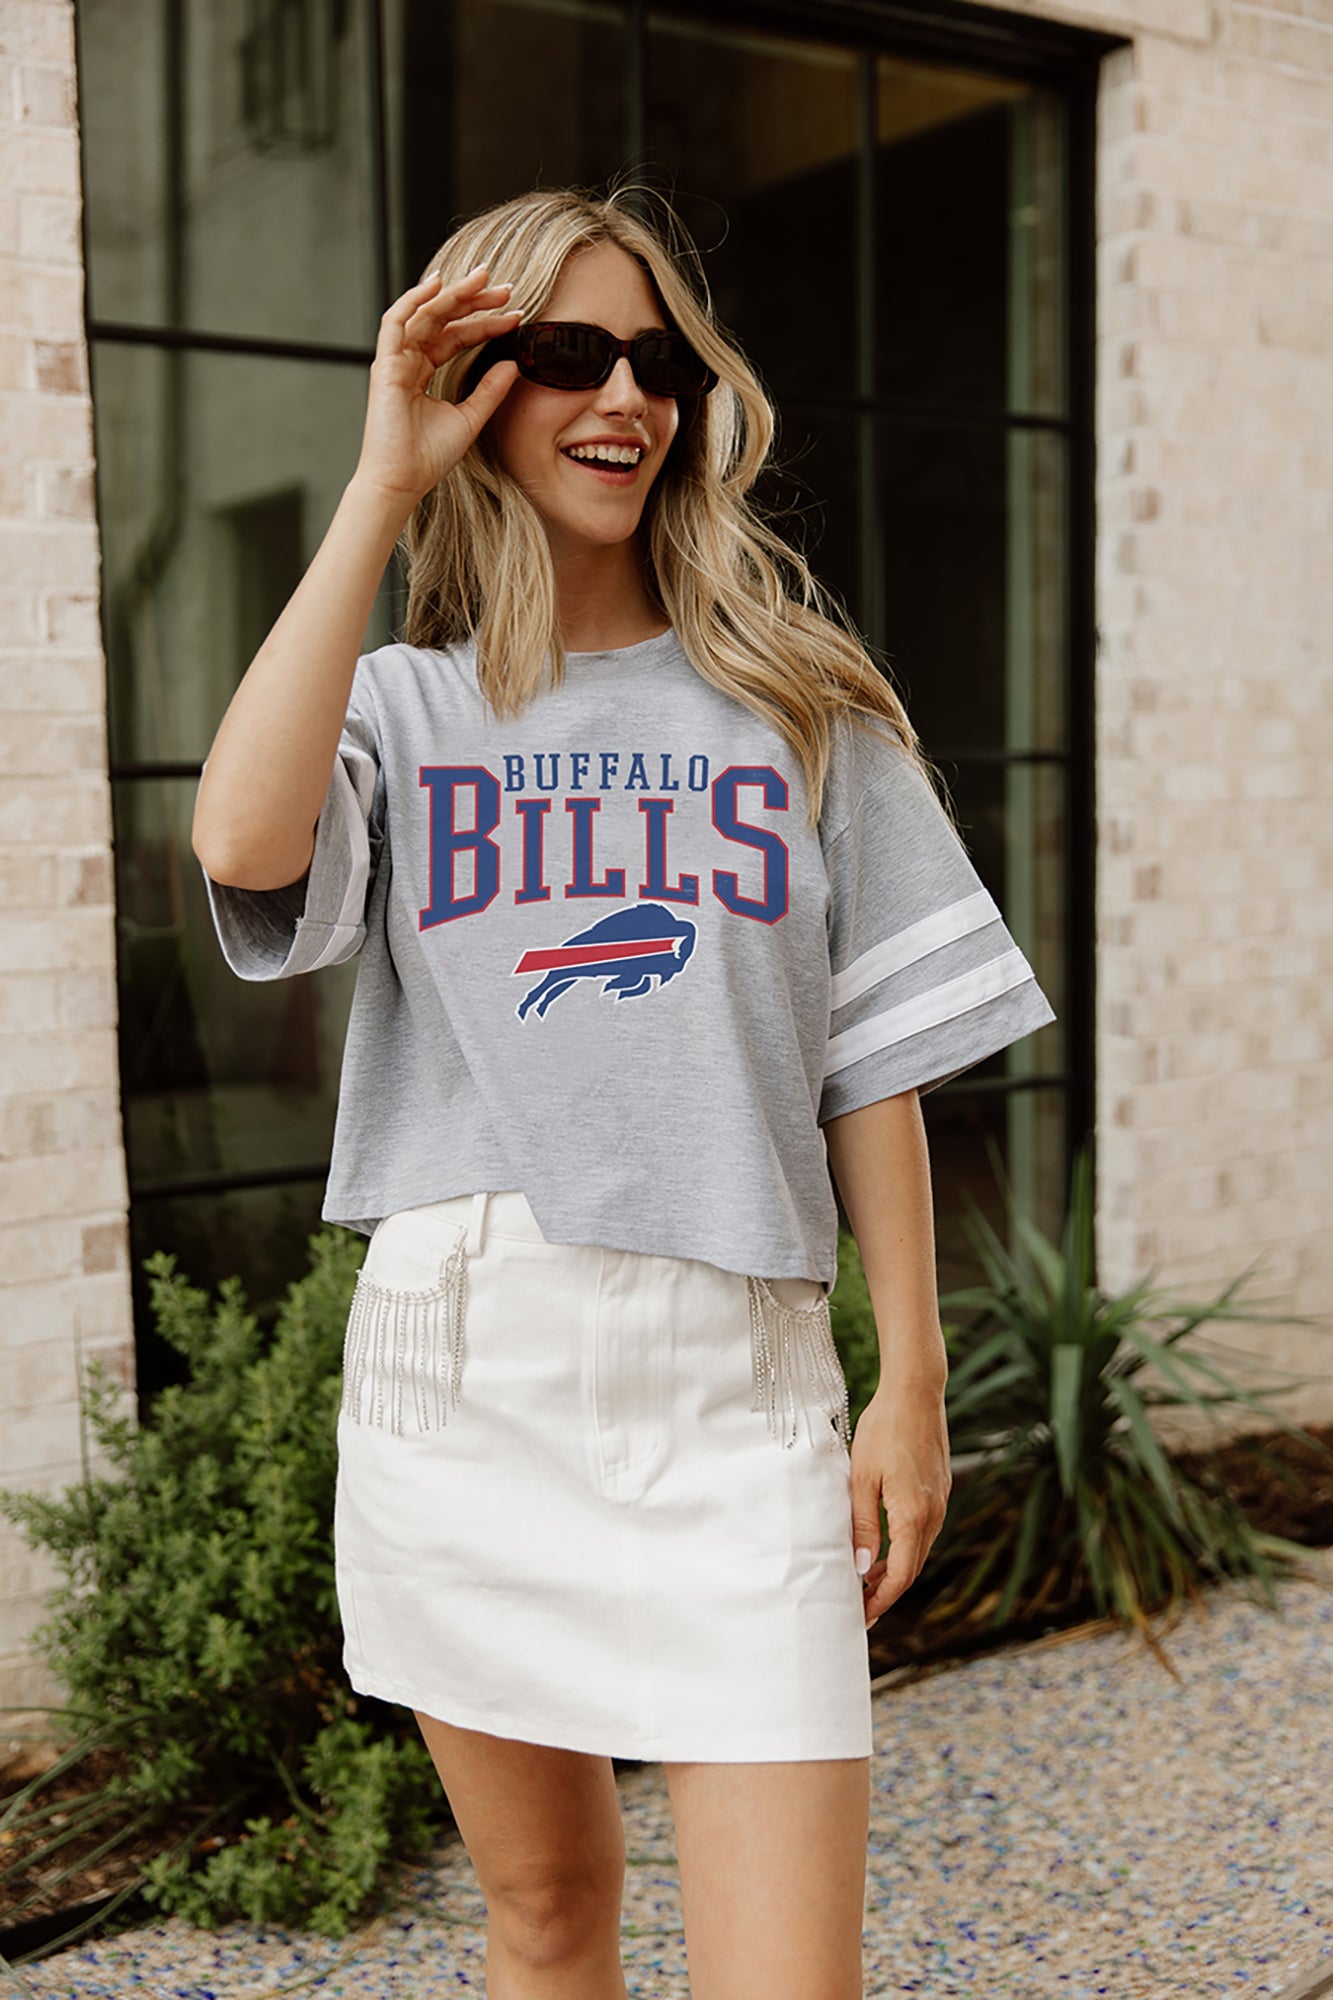 Buffalo Bills Outfit  Nfl outfits, Football tailgate outfit